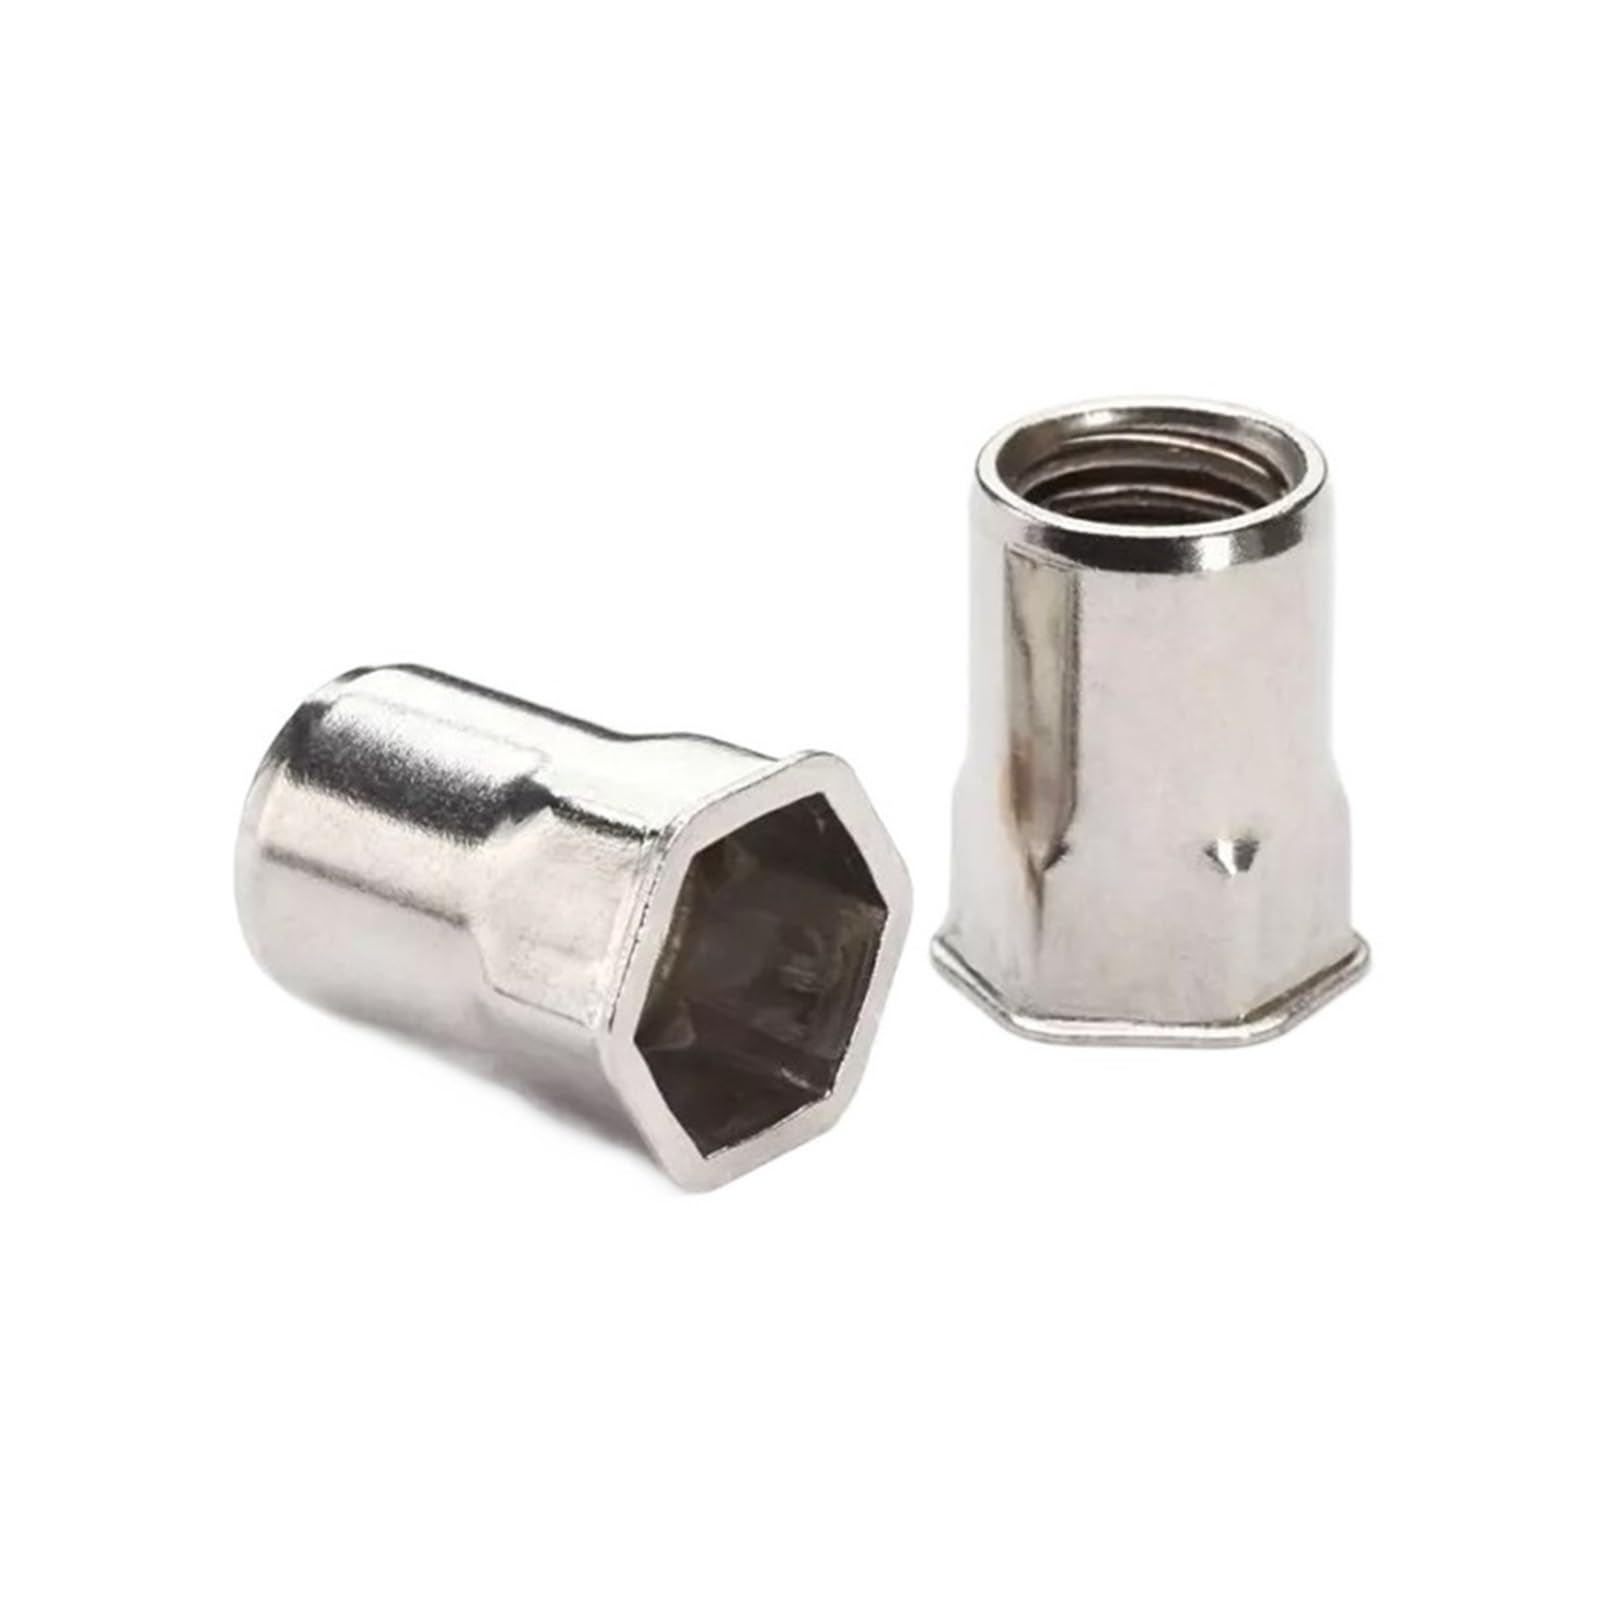 Insert Nut Semi Hex Reduced Head  Manufacturers, Suppliers, Importers, Dealers in Mumbai India